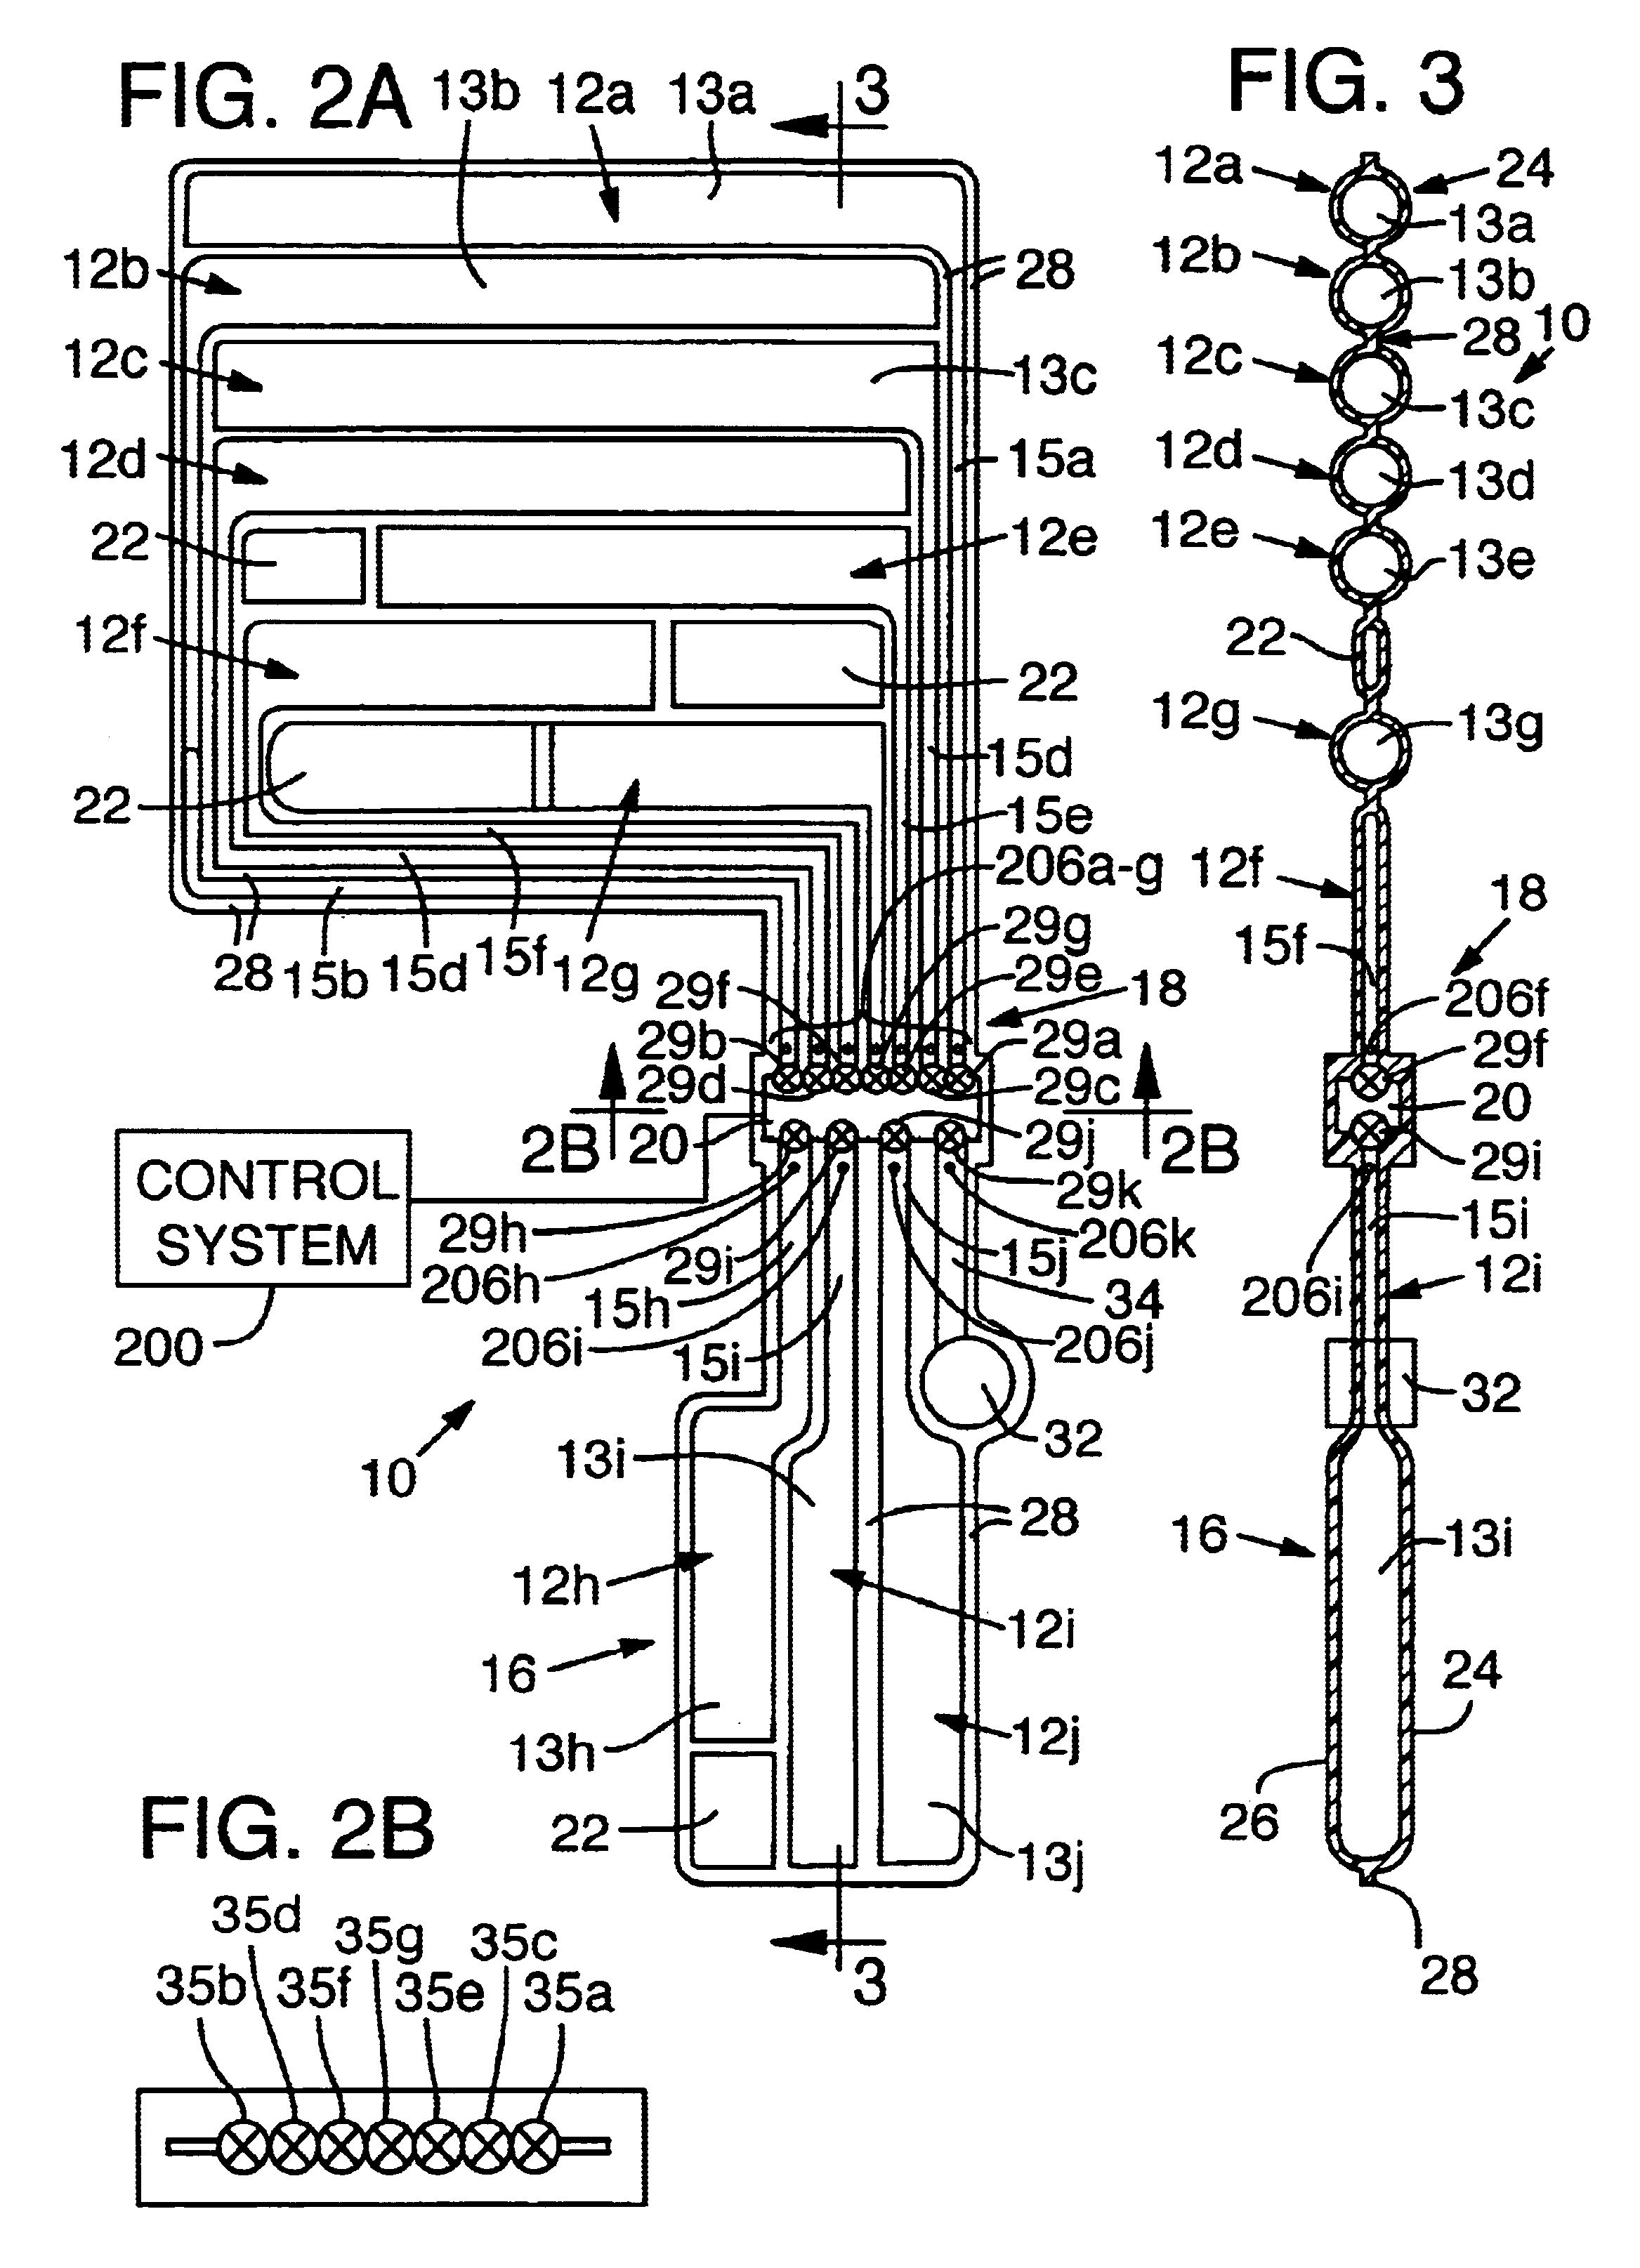 Dynamically-controlled cushioning system for an article of footwear